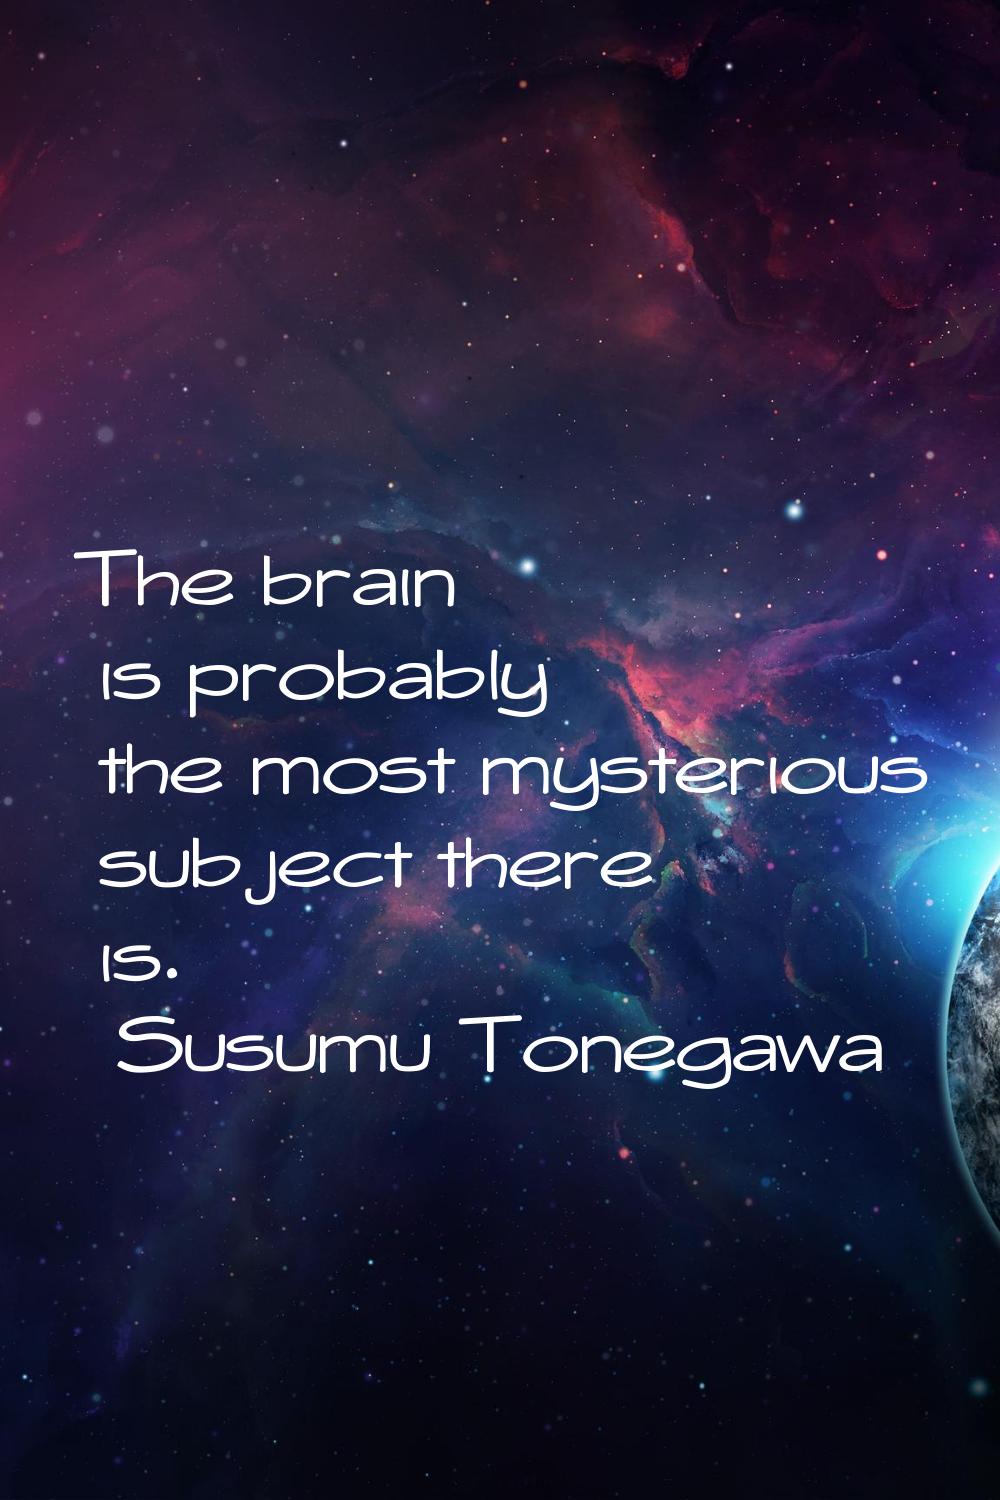 The brain is probably the most mysterious subject there is.